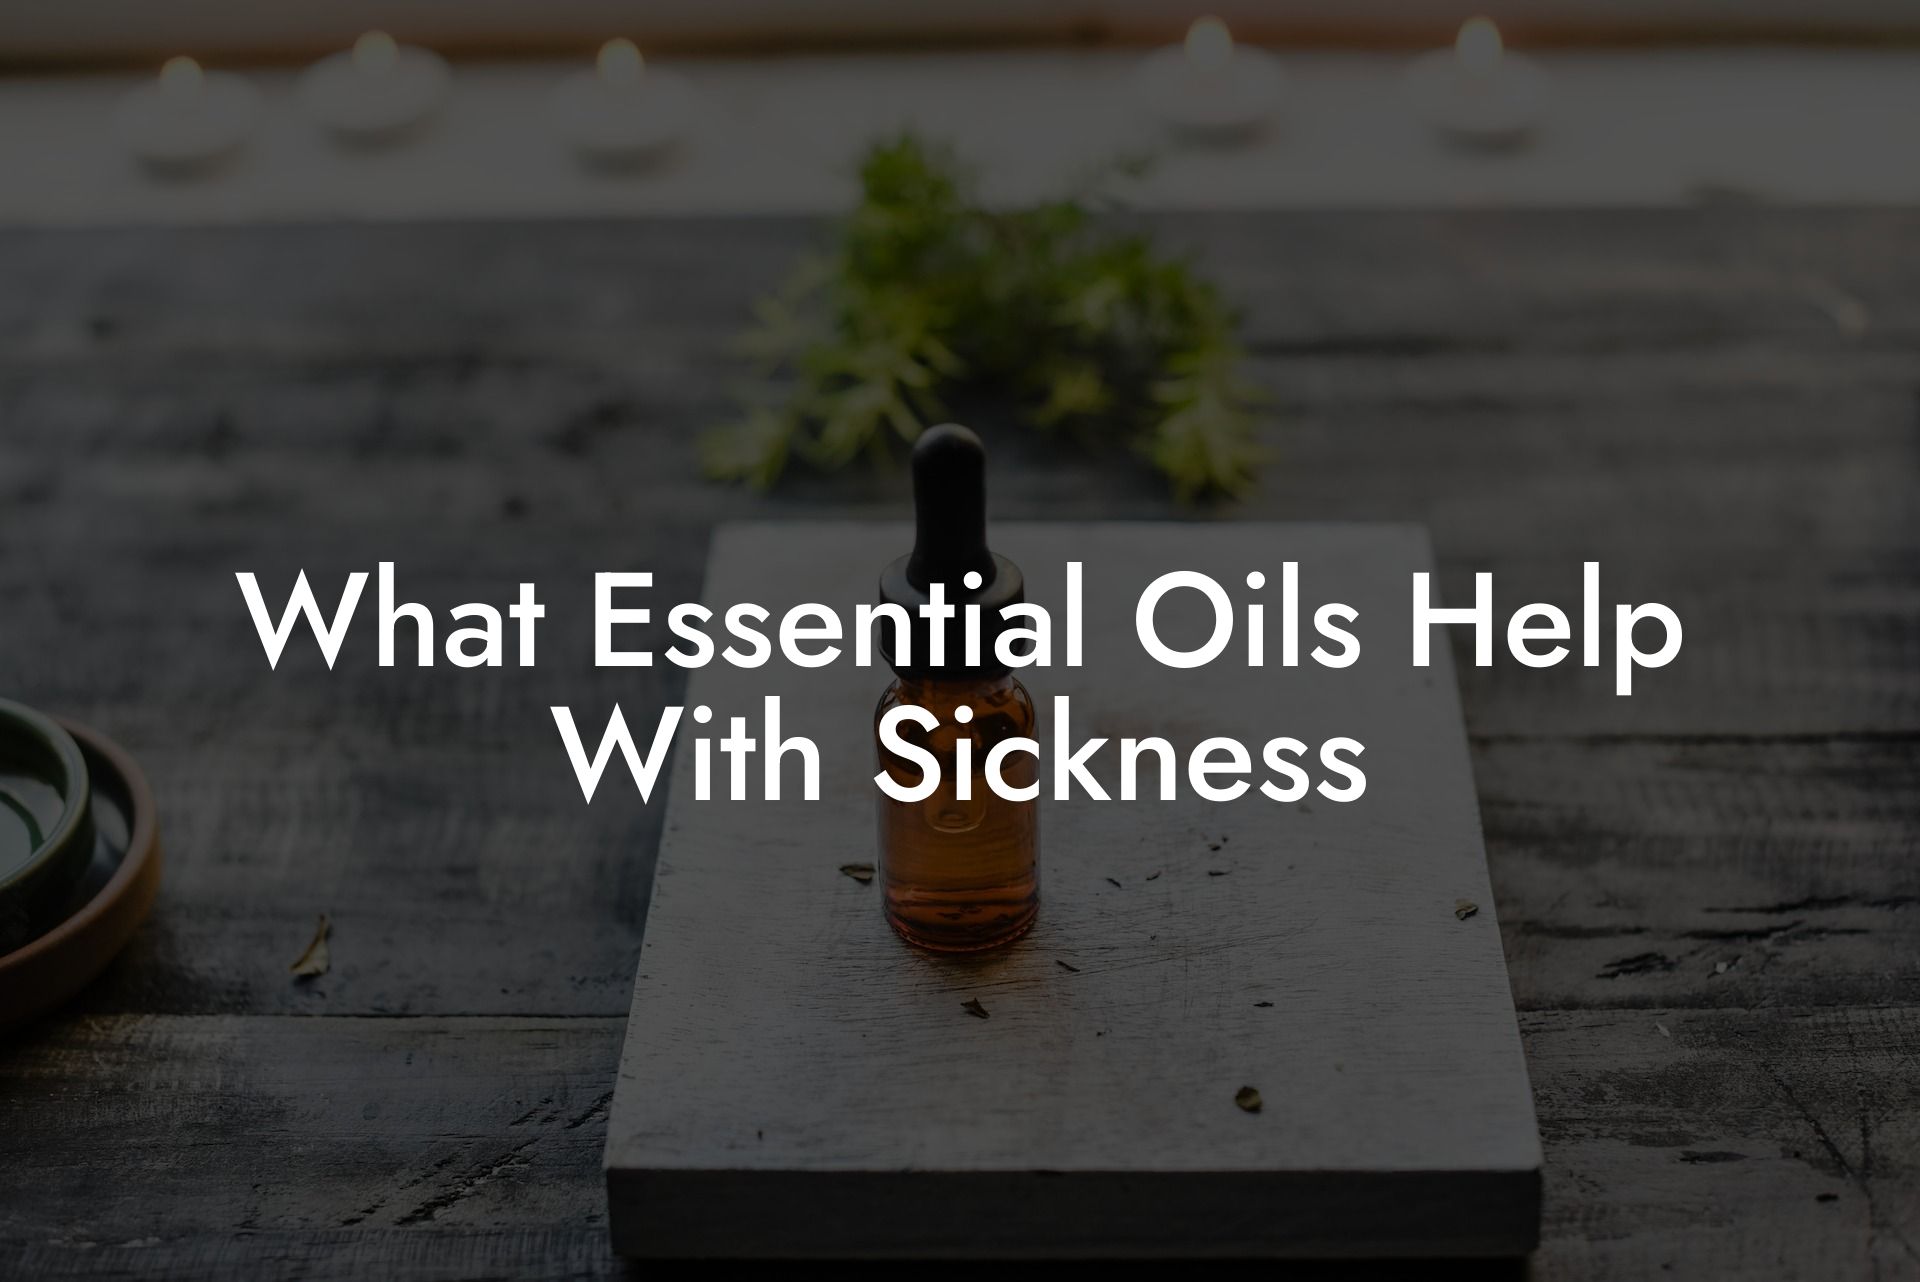 What Essential Oils Help With Sickness